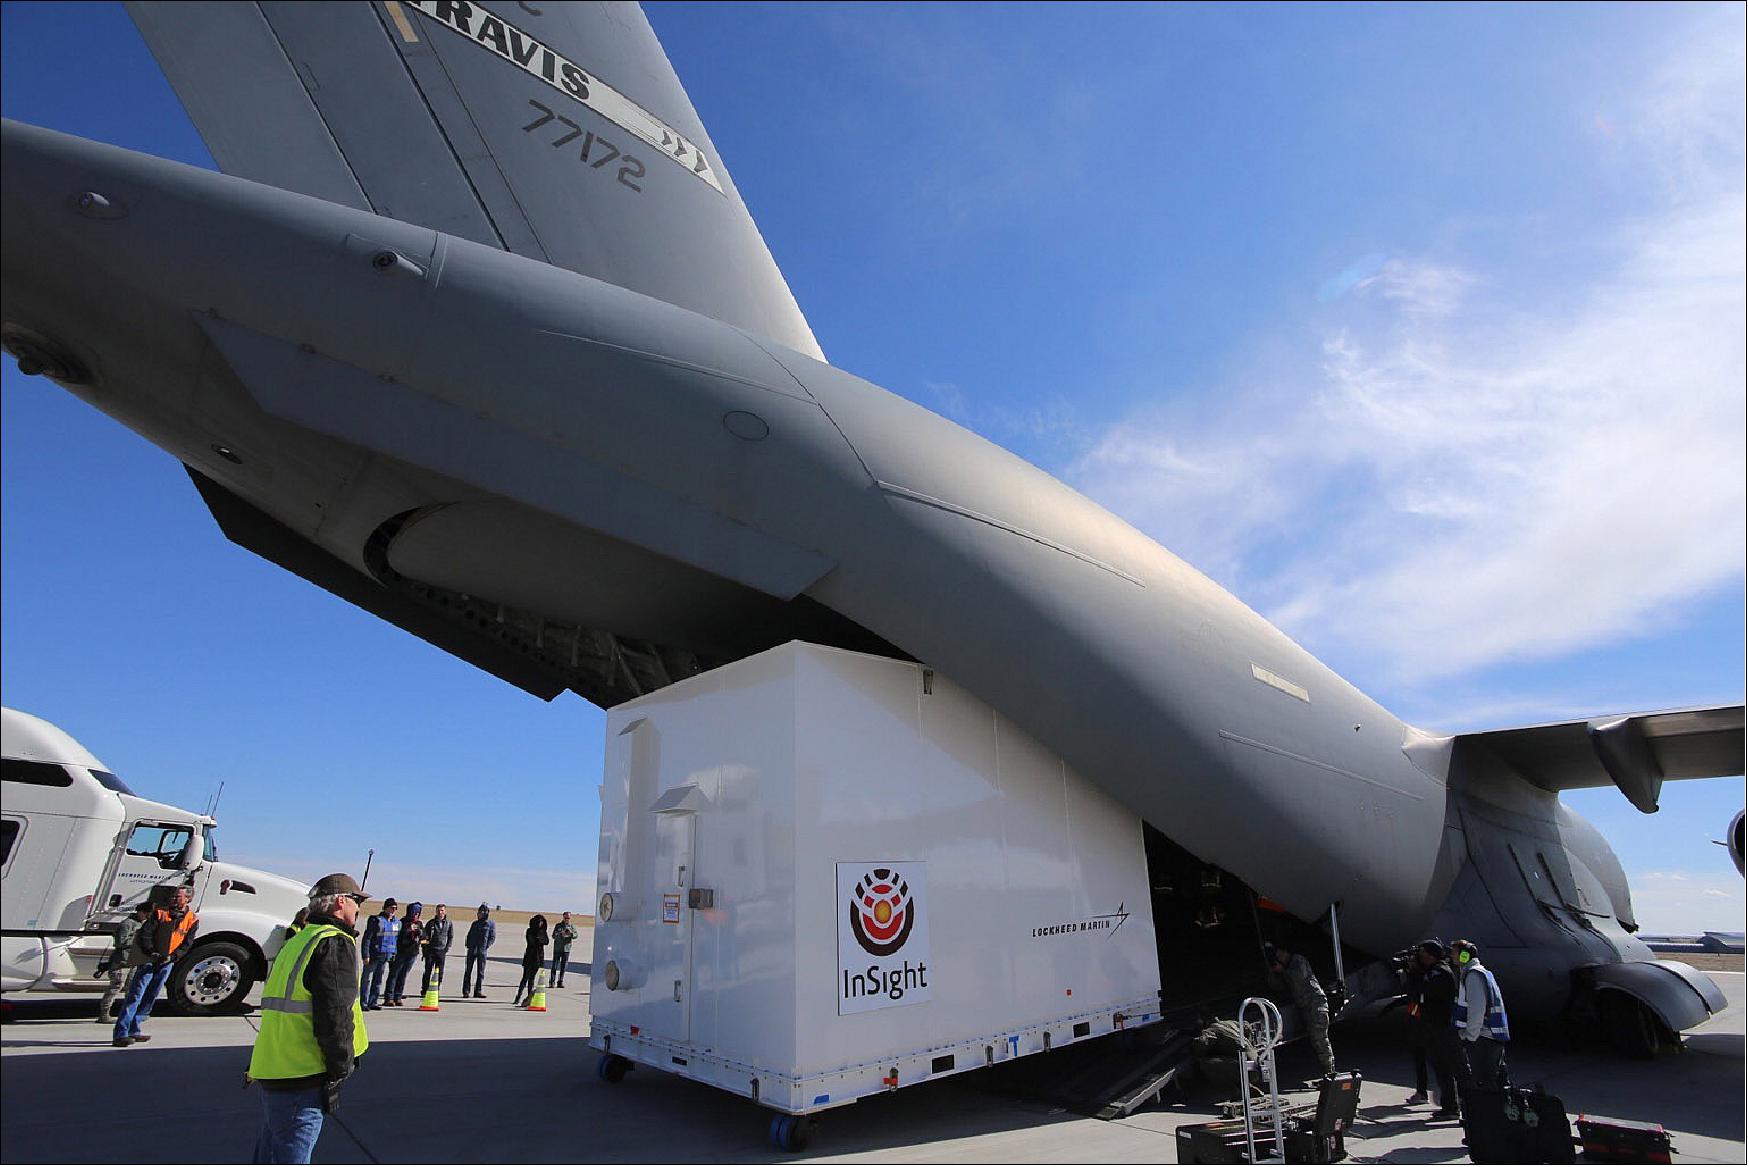 Figure 7: Personnel supporting NASA's InSight mission to Mars load the crated InSight spacecraft into a C-17 cargo aircraft at Buckley Air Force Base, Denver, for shipment to Vandenberg Air Force Base, California (image credit: NASA/JPL)